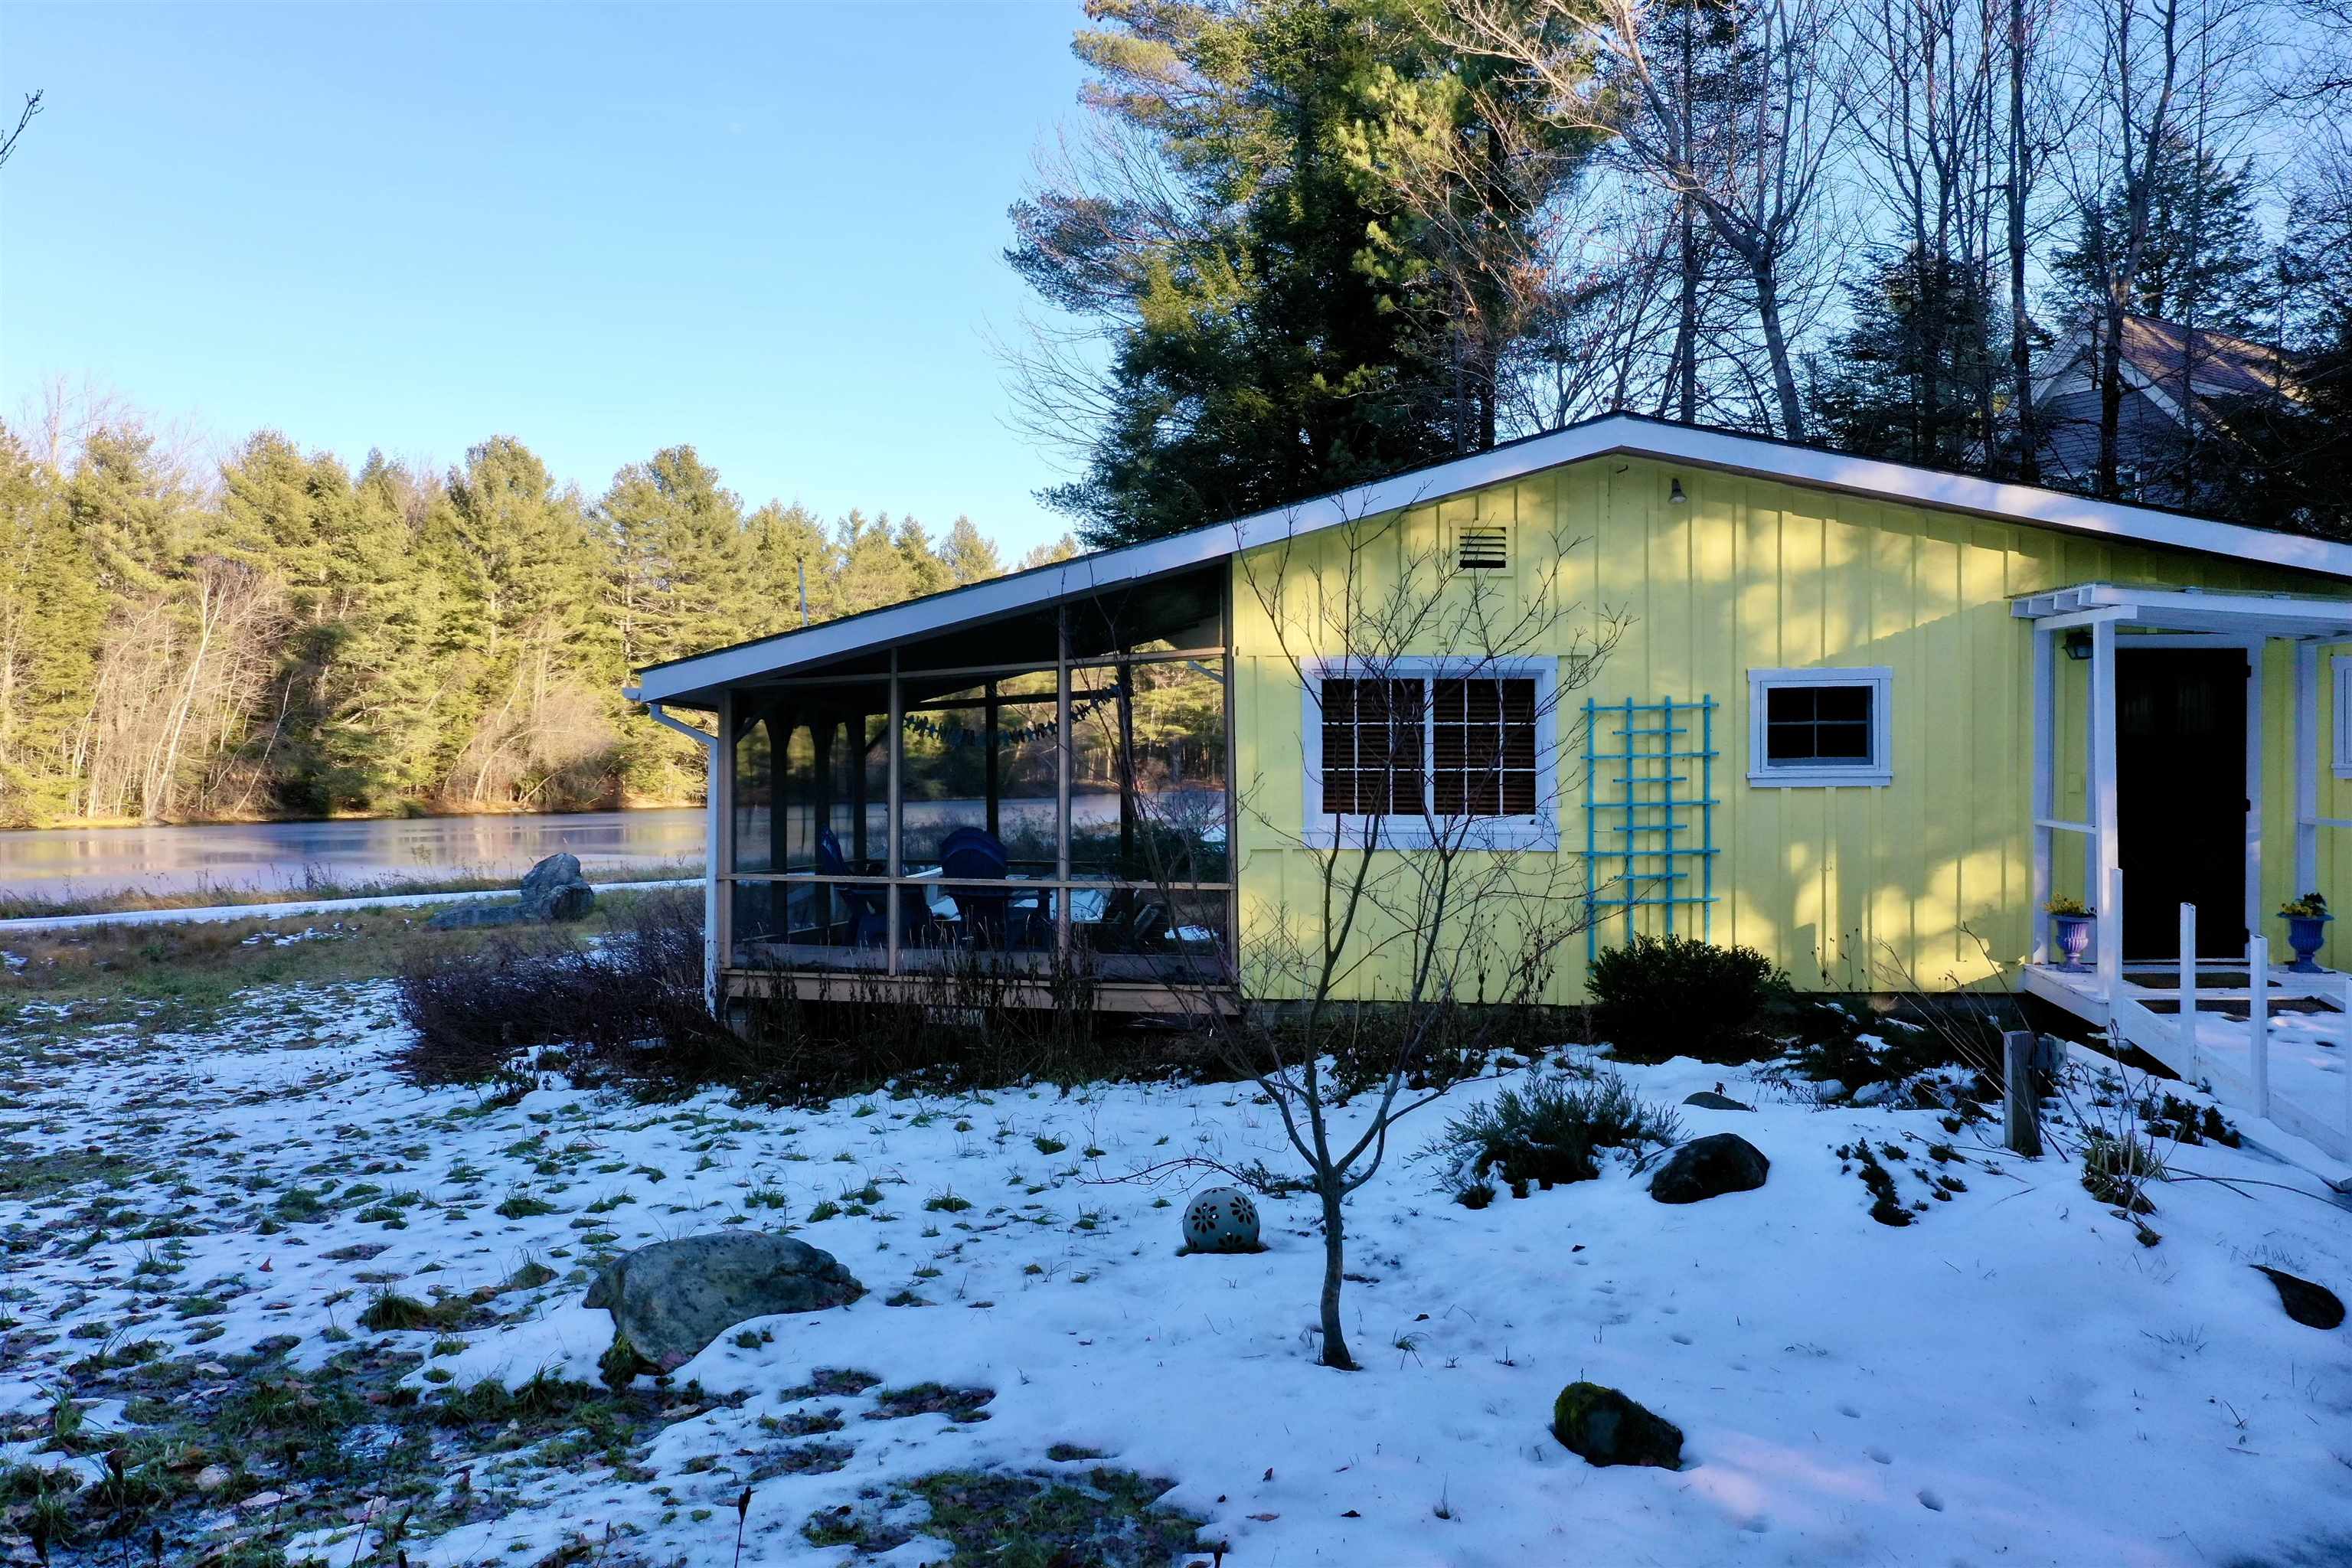 1 Story Single Family Home in New London NH